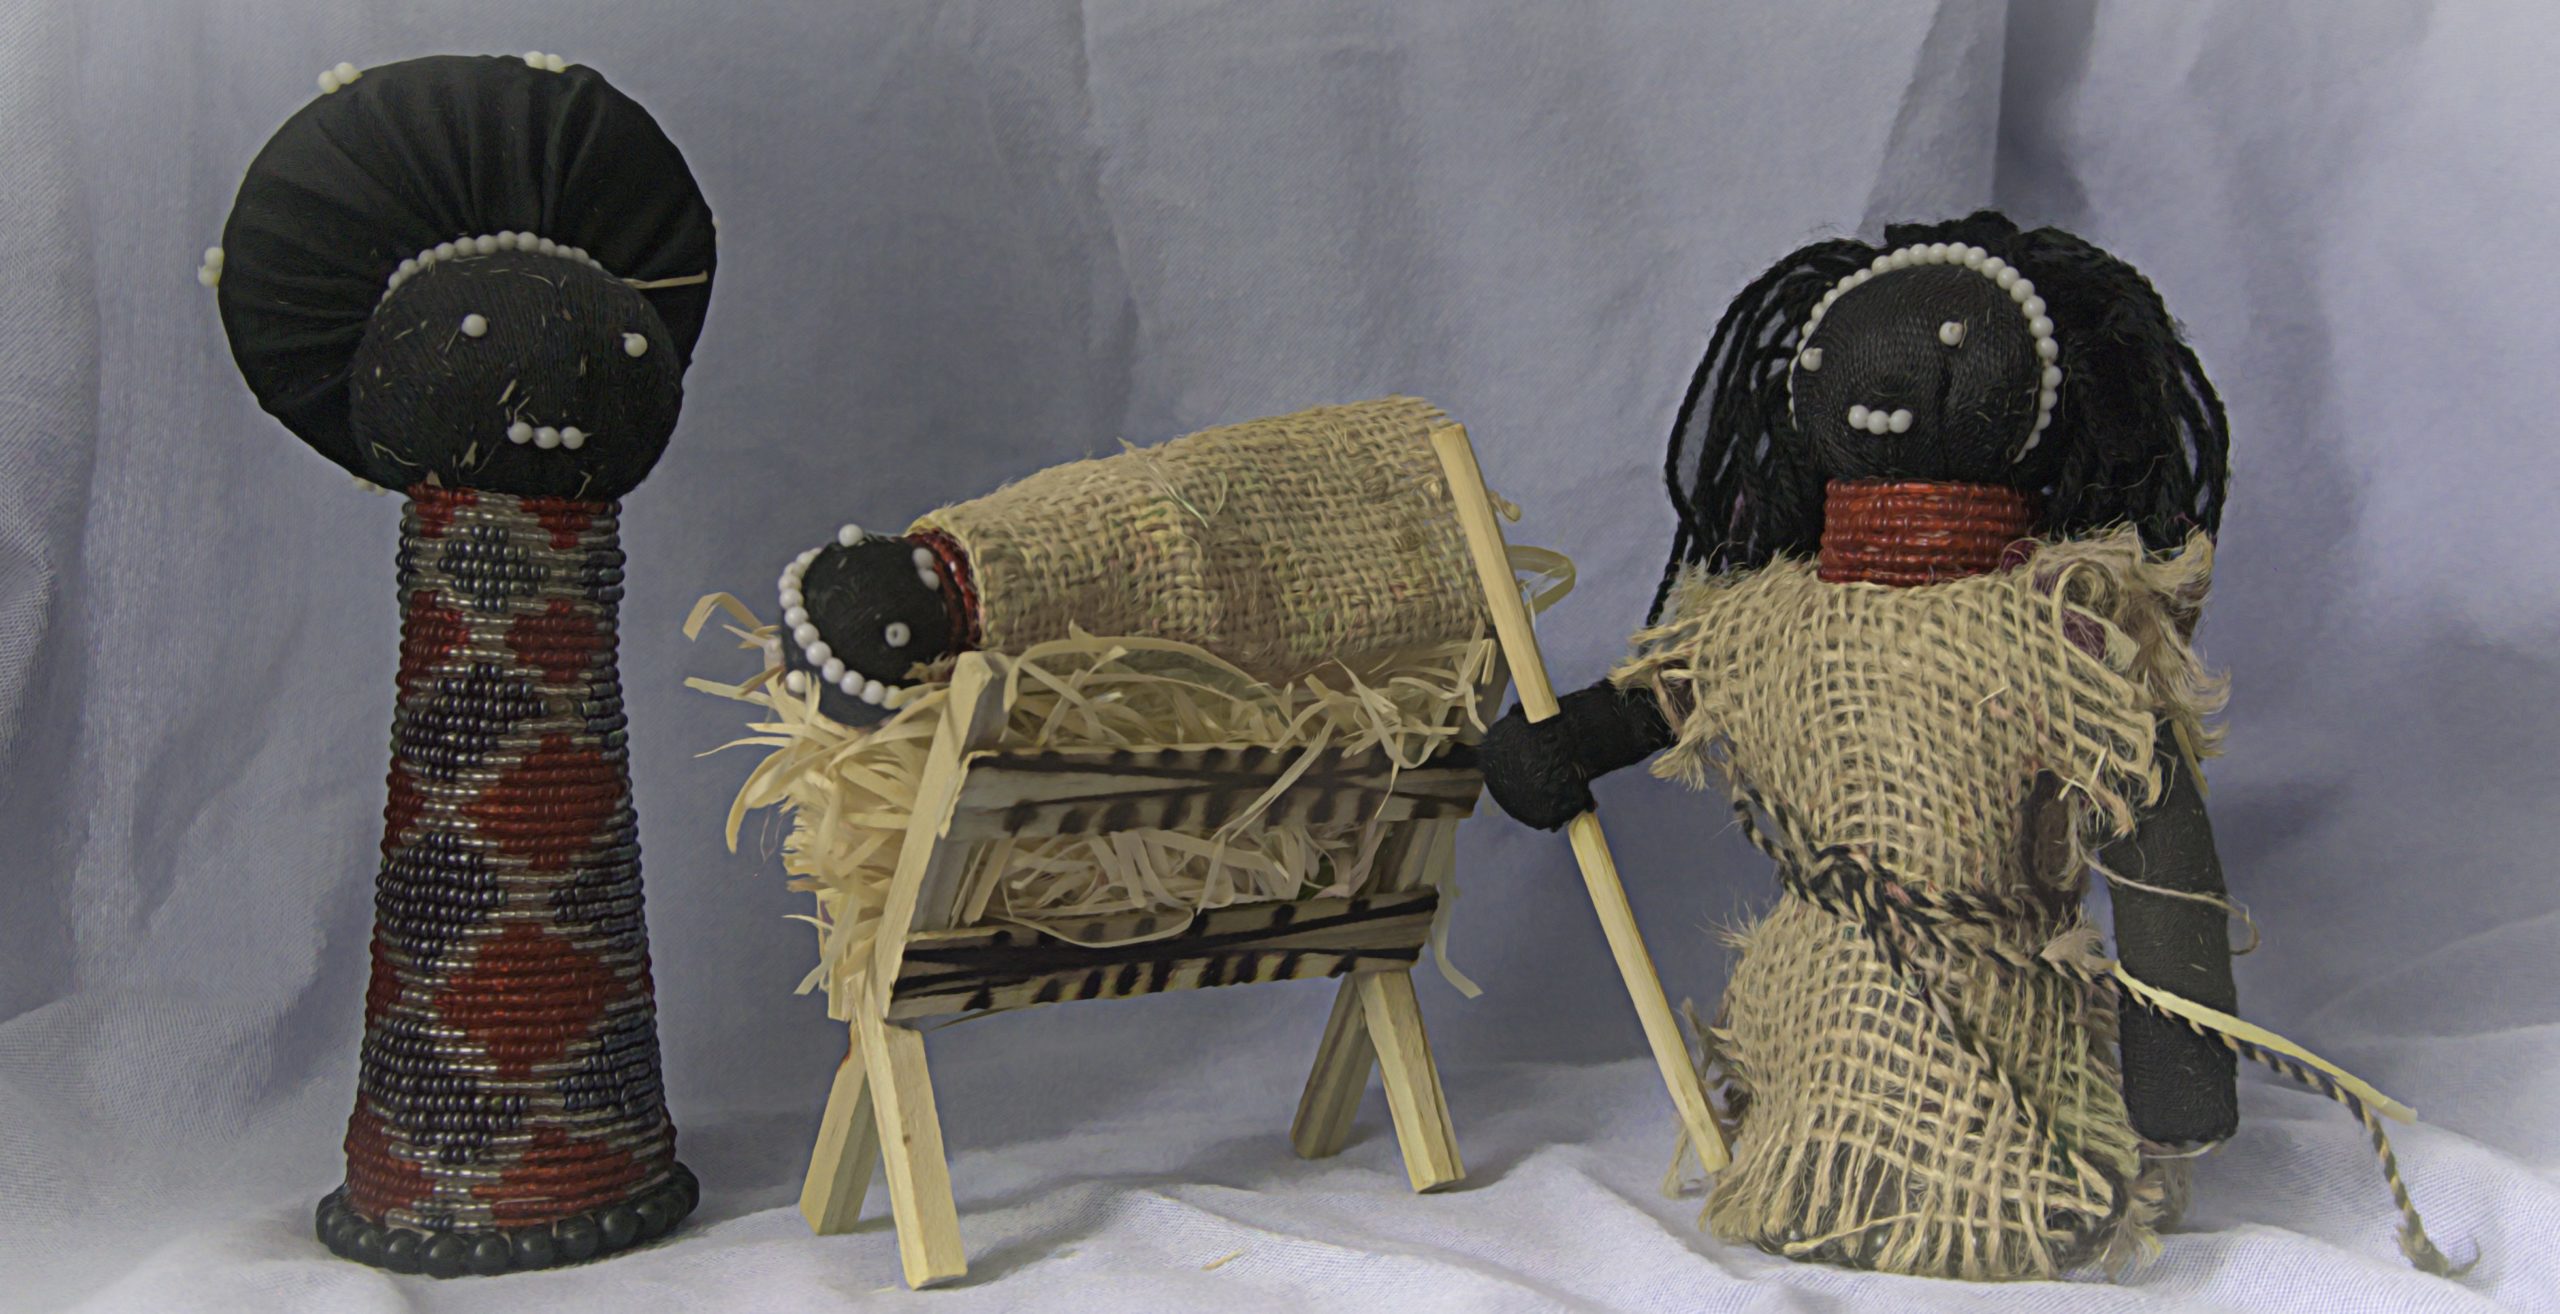 A nativity scene in the Zuu style with burlap and beads